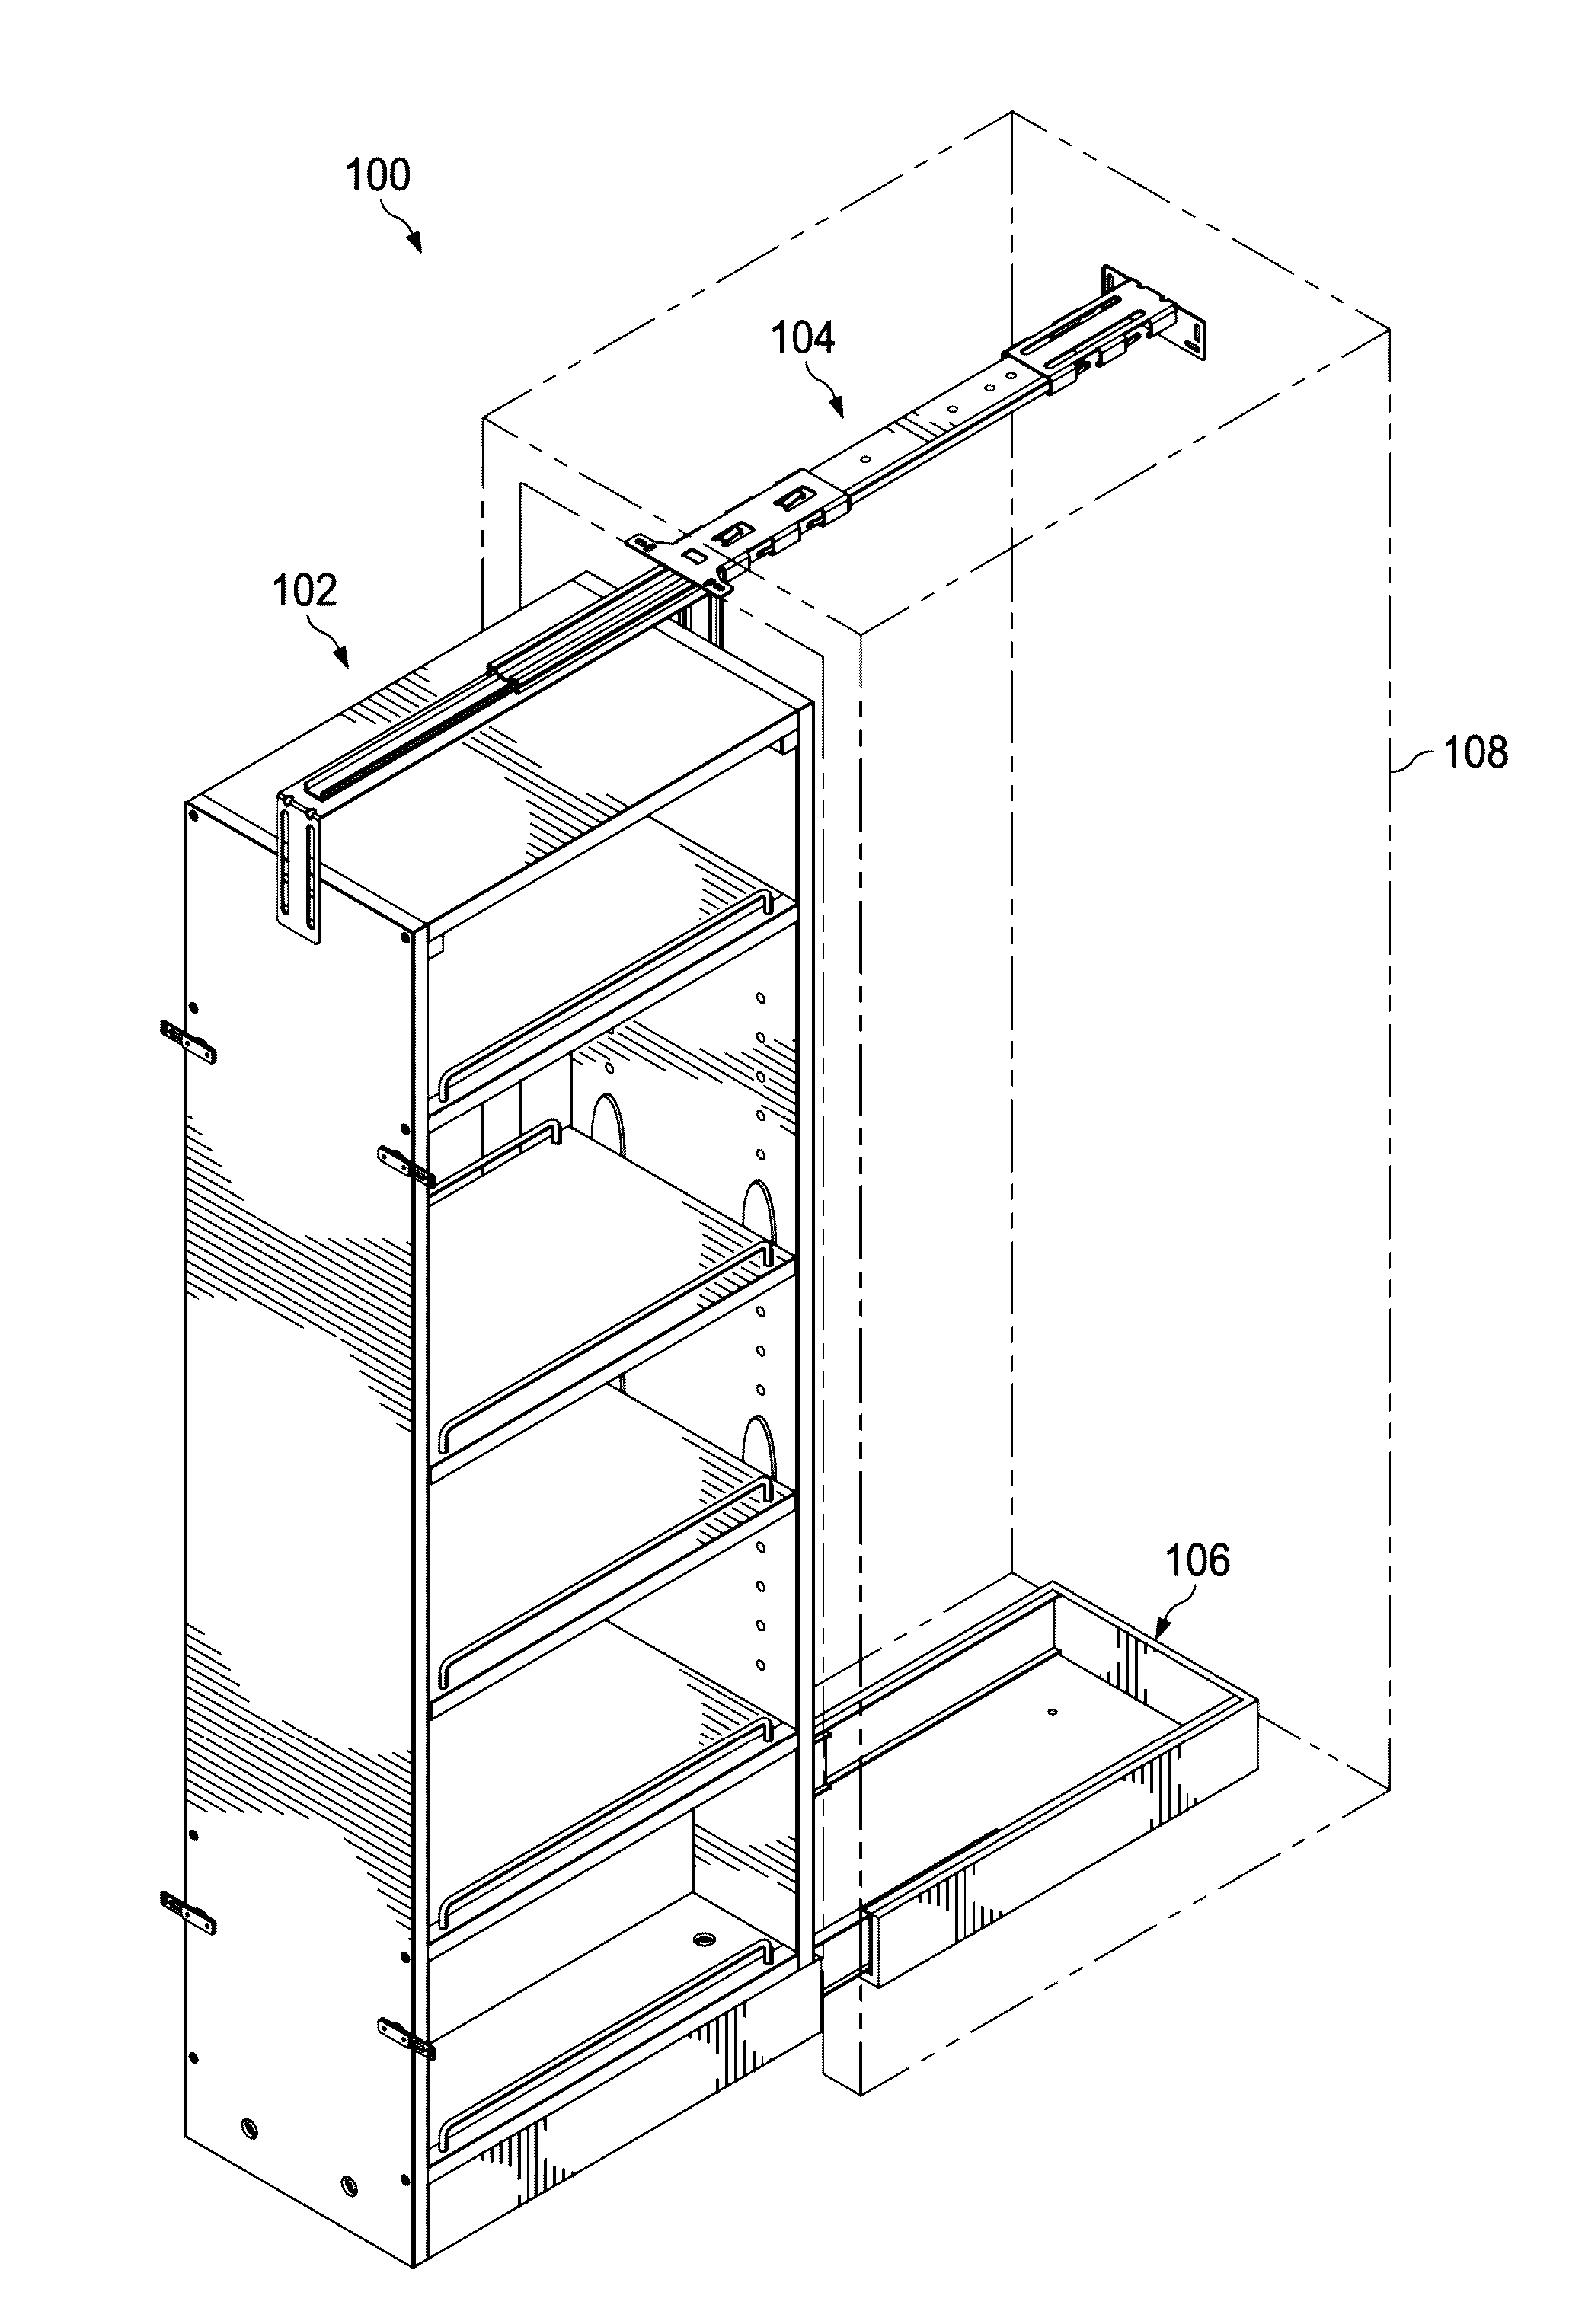 Slidable cabinet pullout apparatus and method of use